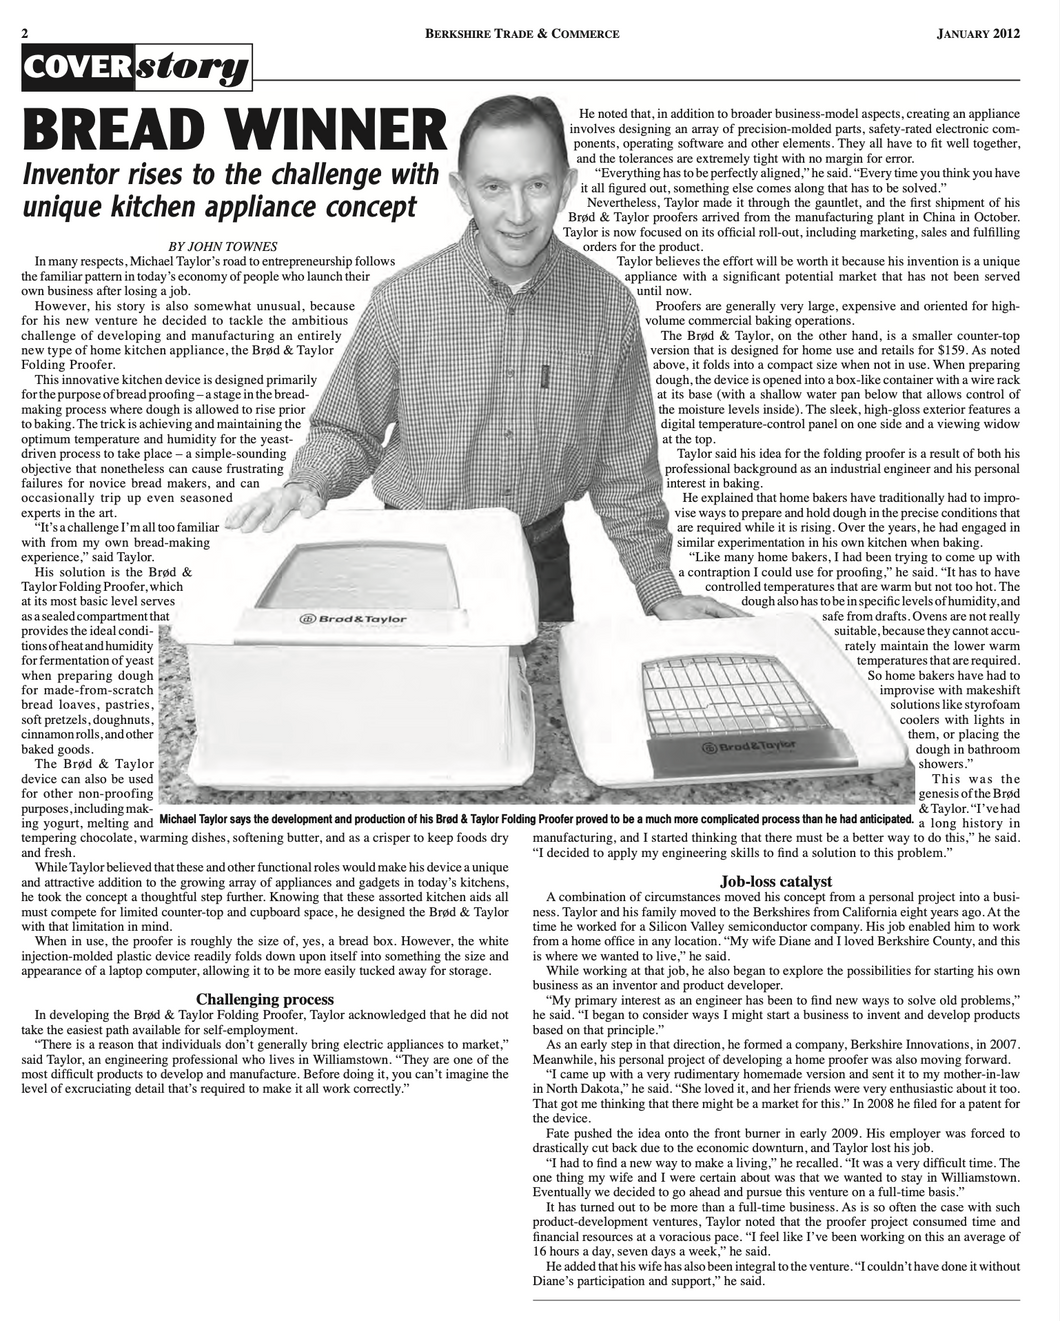 Local US newspaper article on Michael Taylors new invention, the Folding Bread Proofer Cabinet - January 2012